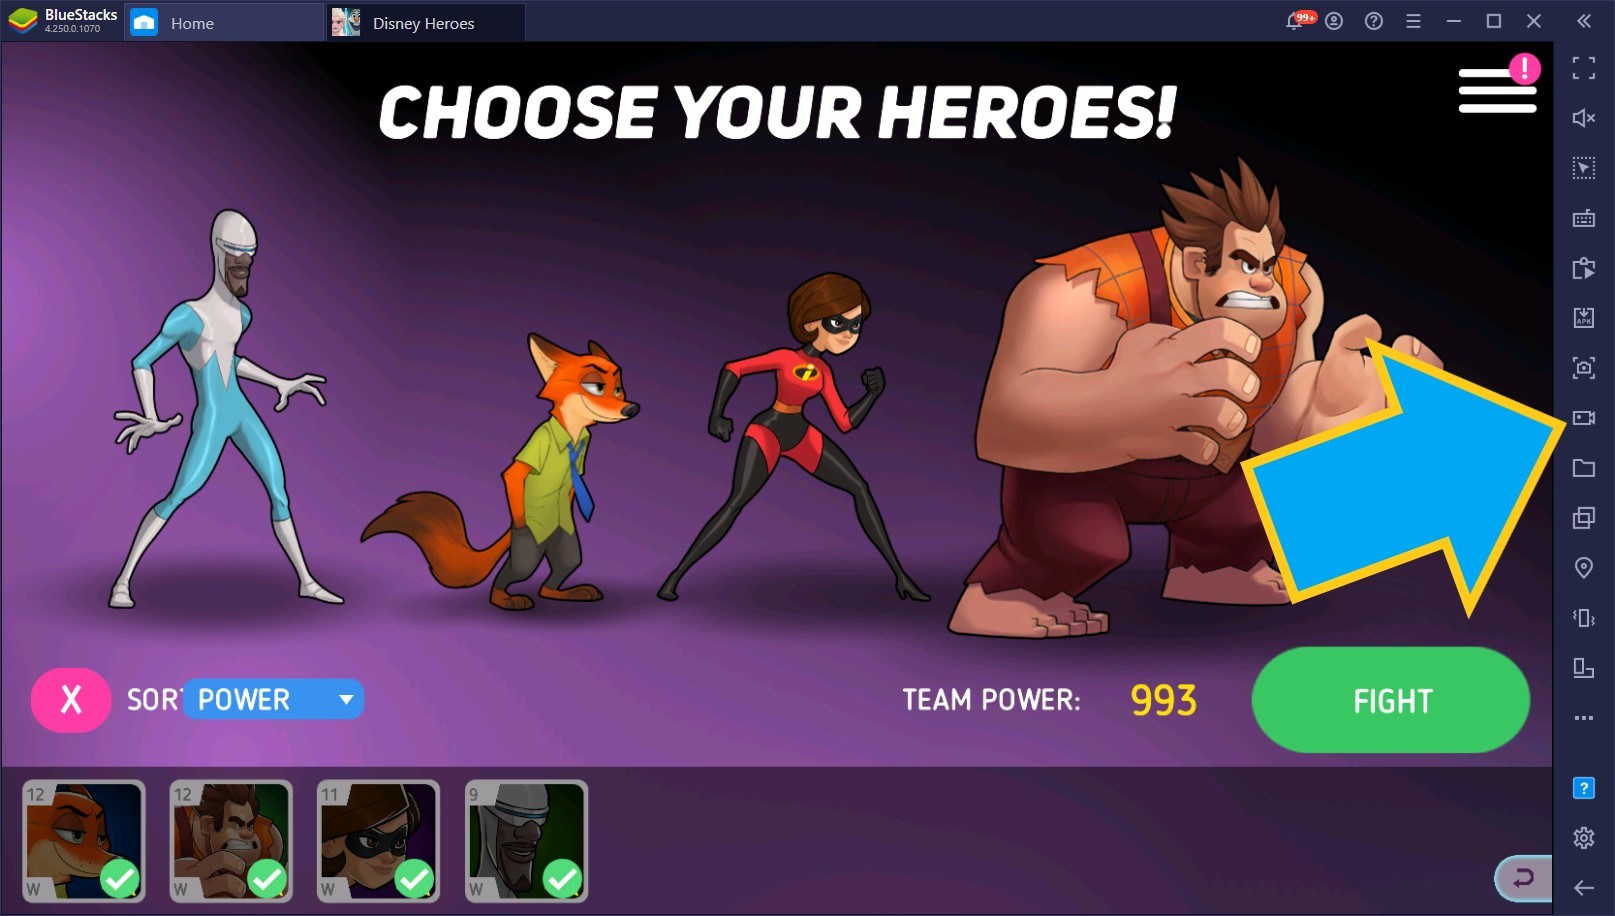 Disney Heroes: Battle Mode on PC - Play on BlueStacks and Get Access to Exclusive Tools and Features